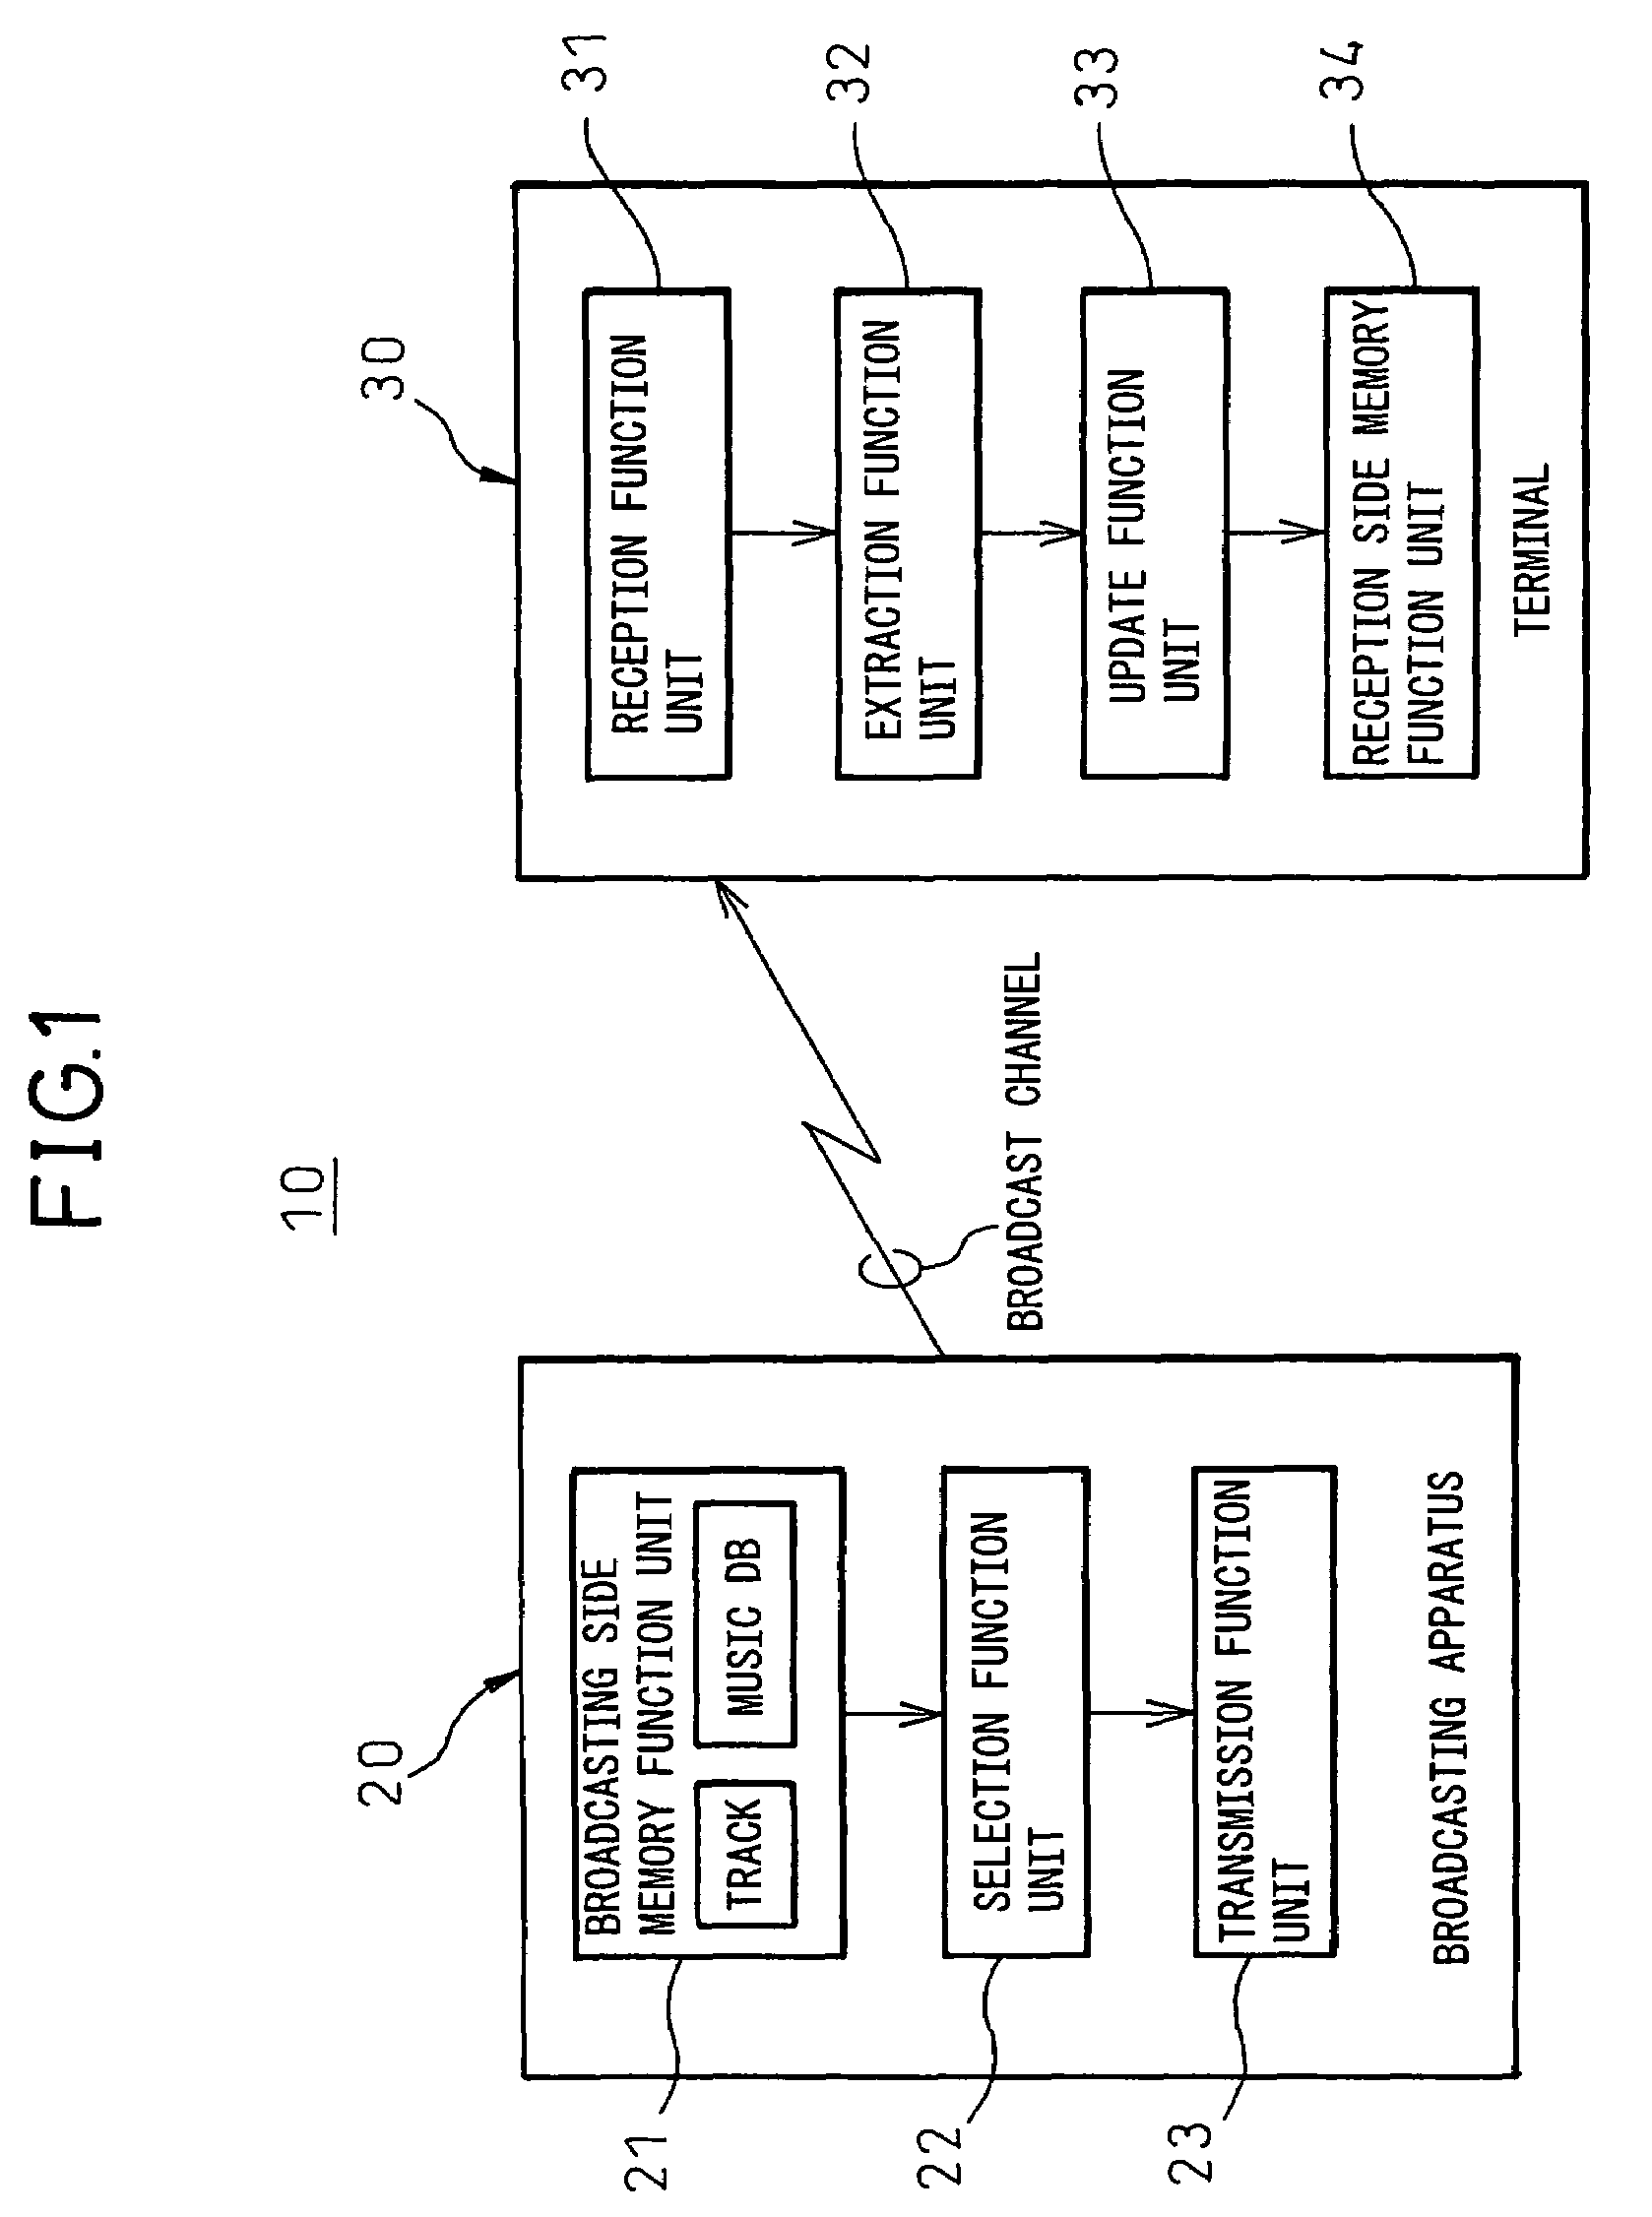 Music information, updating system, music information broadcasting apparatus, terminal apparatus having music information updating function, music information updating method, music information broadcasting method, and music information updating method of terminal apparatus